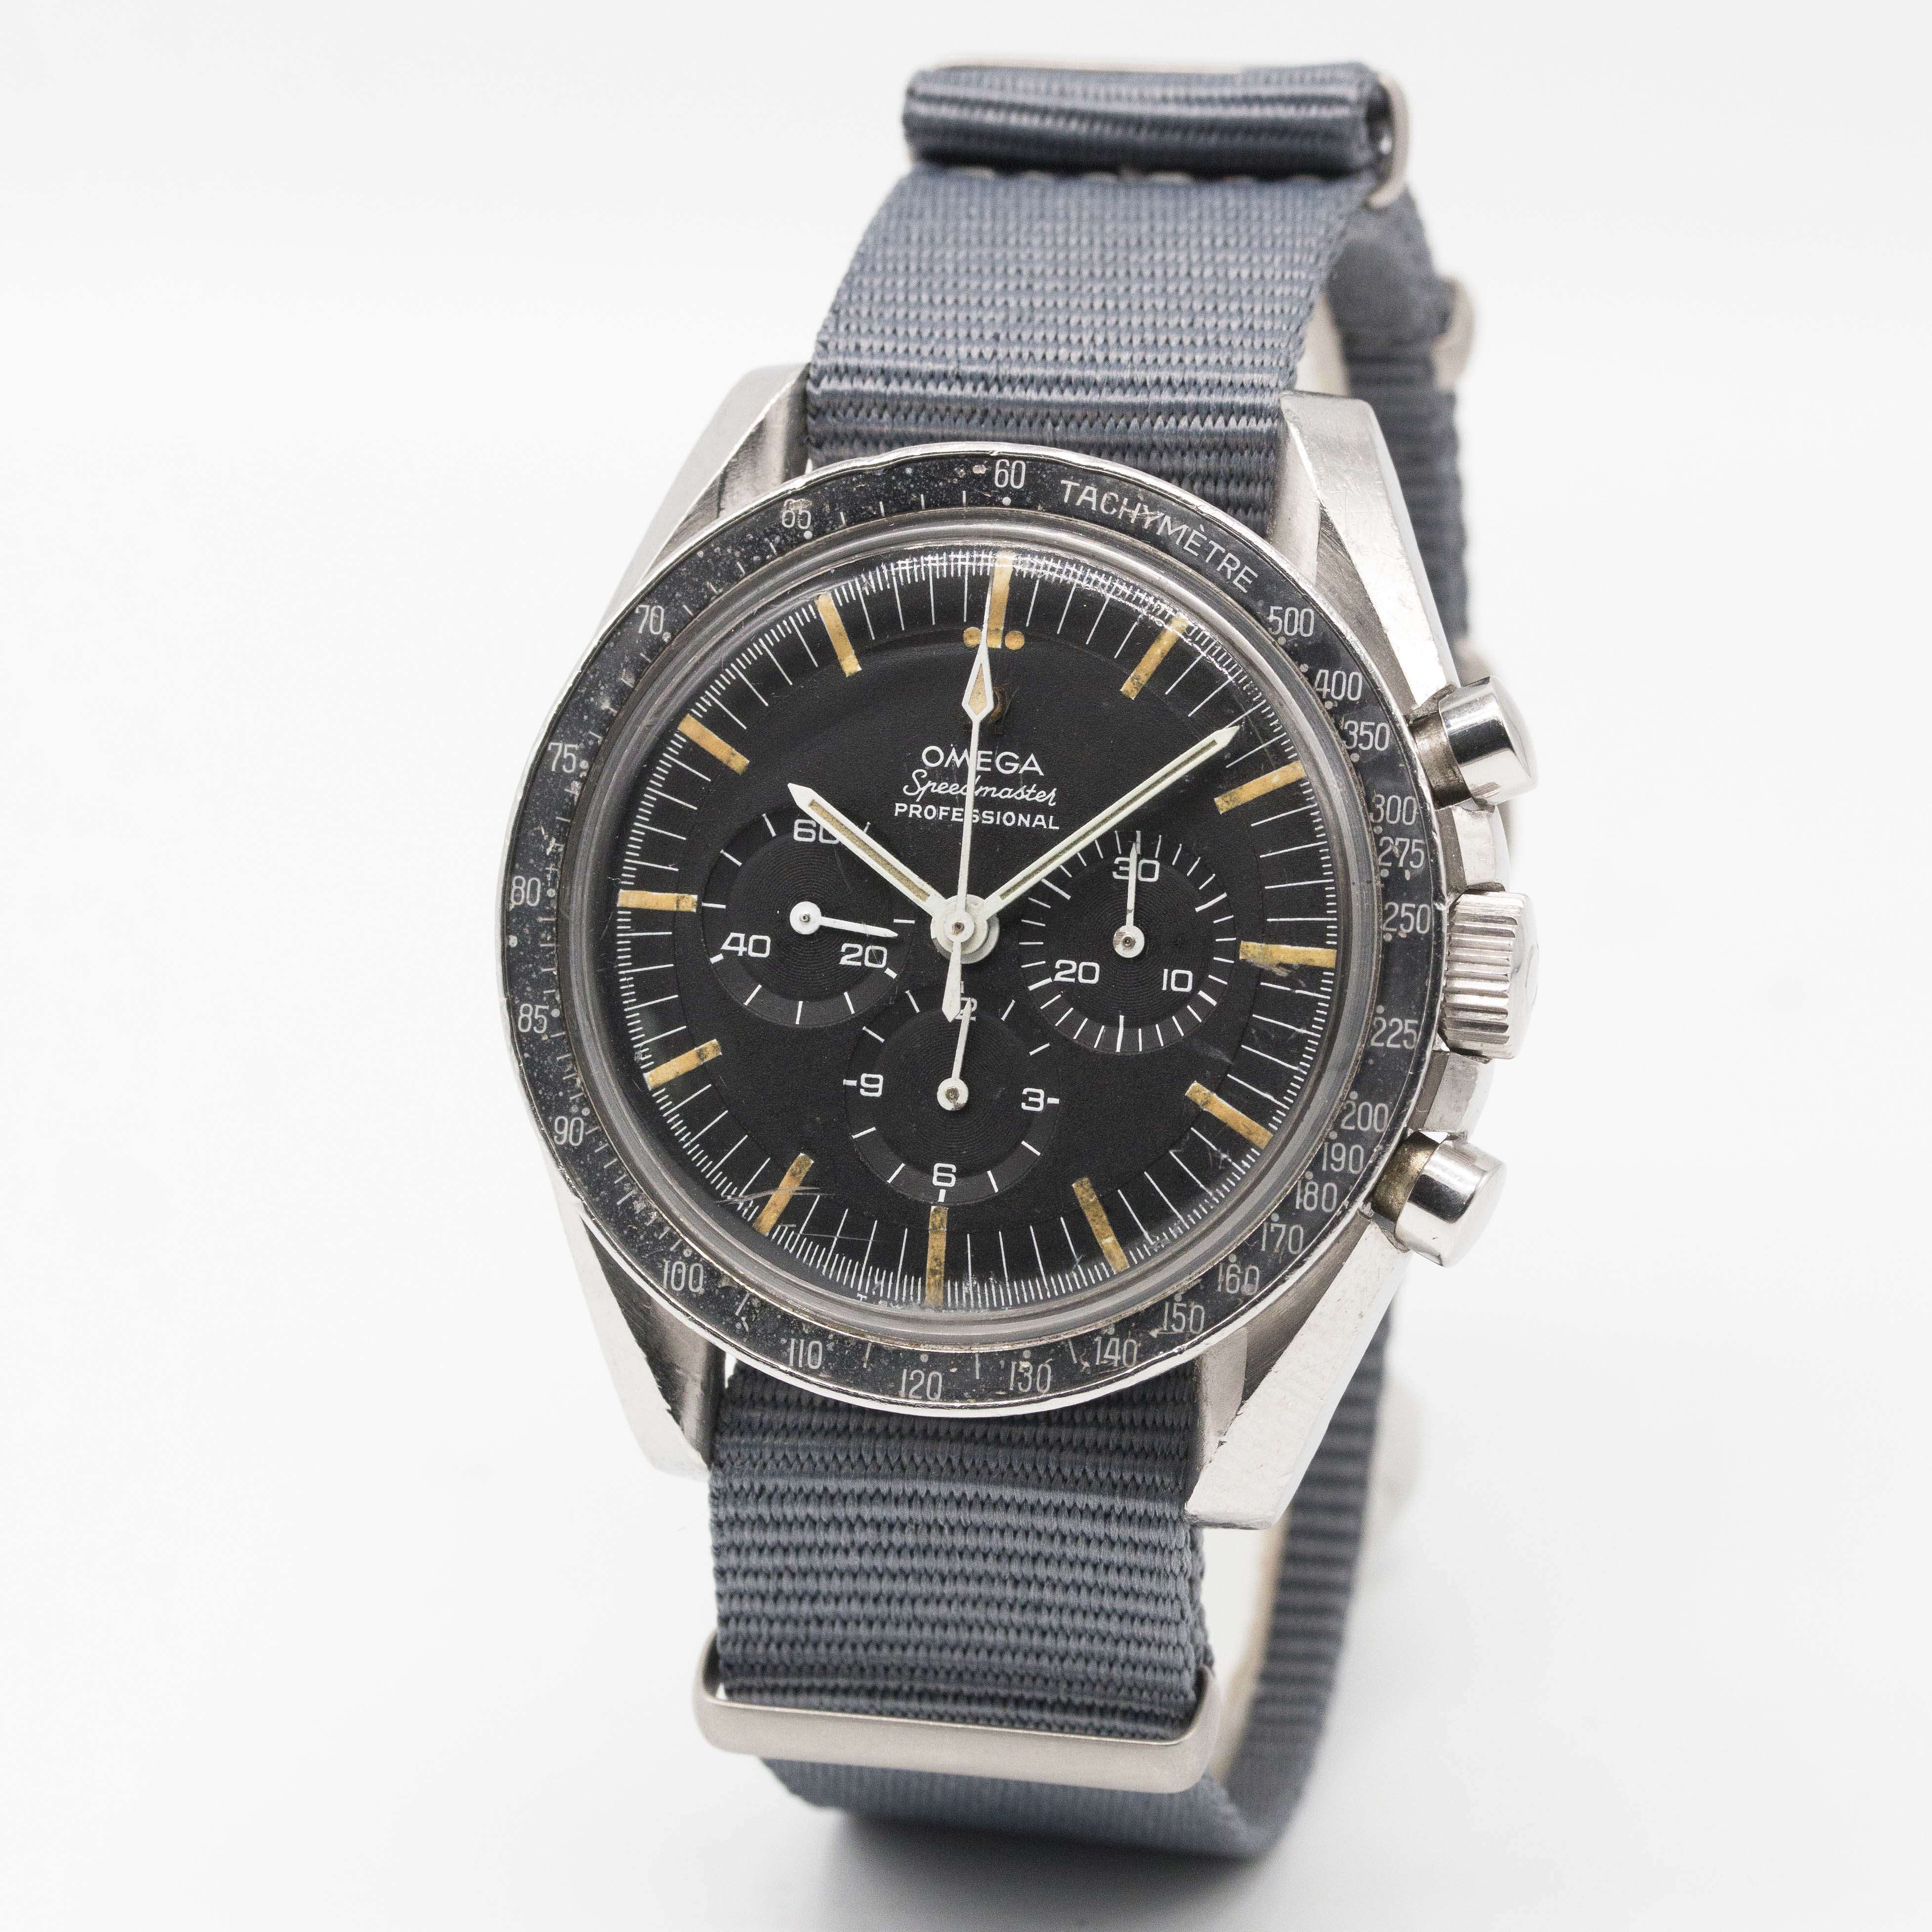 A RARE GENTLEMAN'S STAINLESS STEEL OMEGA SPEEDMASTER PROFESSIONAL "PRE MOON" CHRONOGRAPH WRIST WATCH - Image 5 of 11